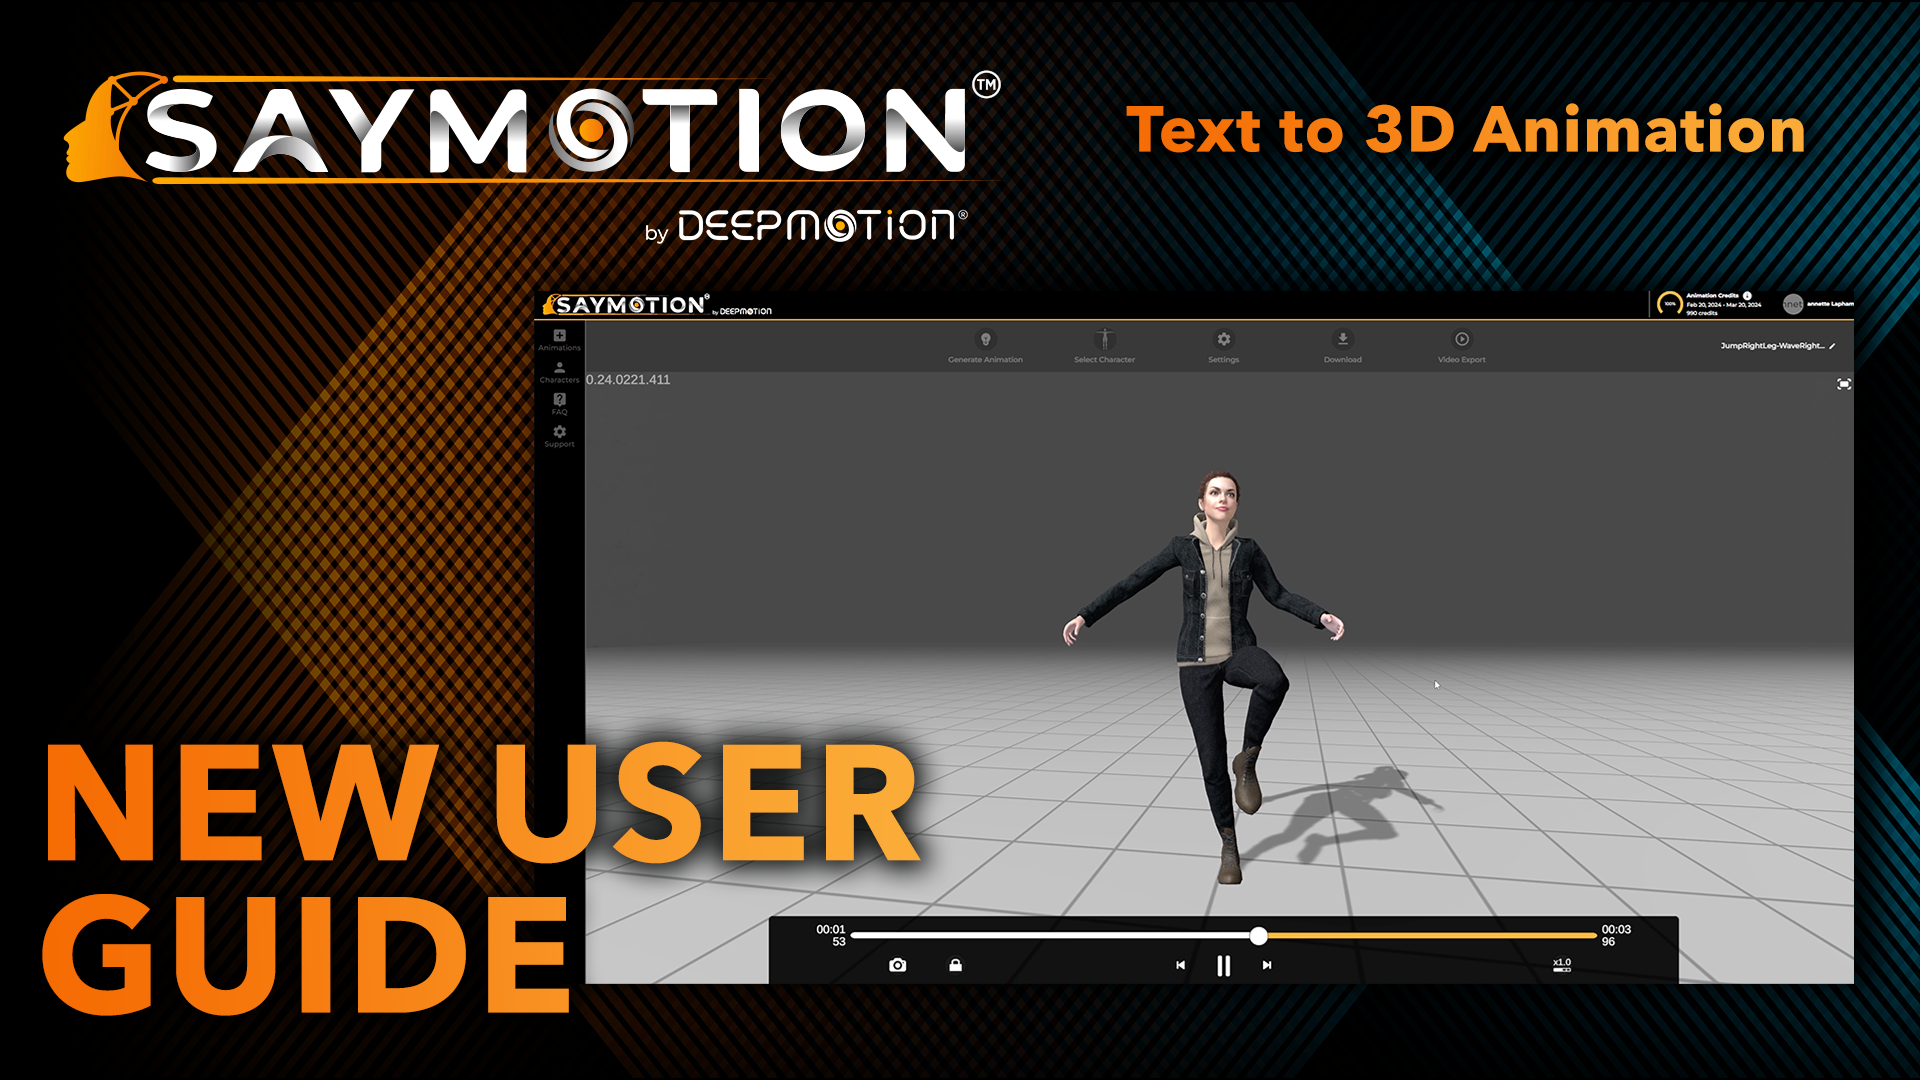 SayMotion™ Open Beta Guide: Getting Started With Text-to-3D Animation